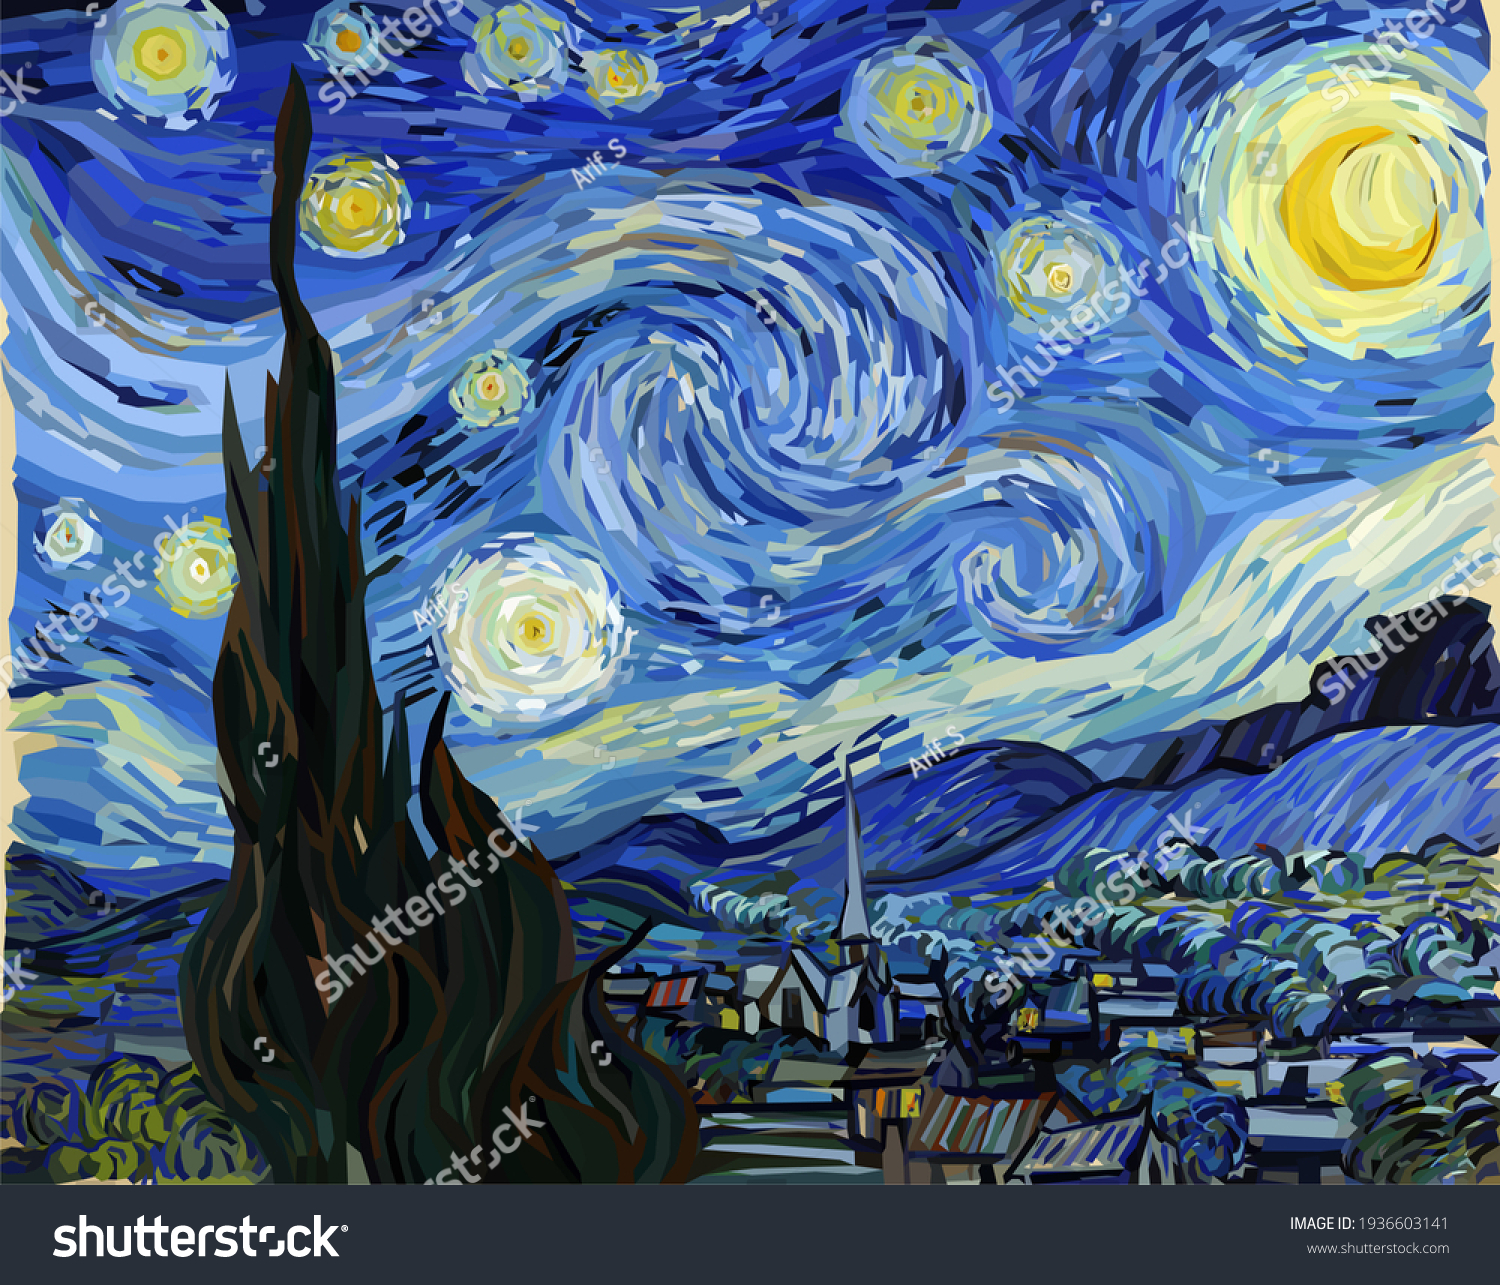 The Starry Night - Vincent van Gogh Wall Mural Traditional Painting Conceptual Polygonal Illustration